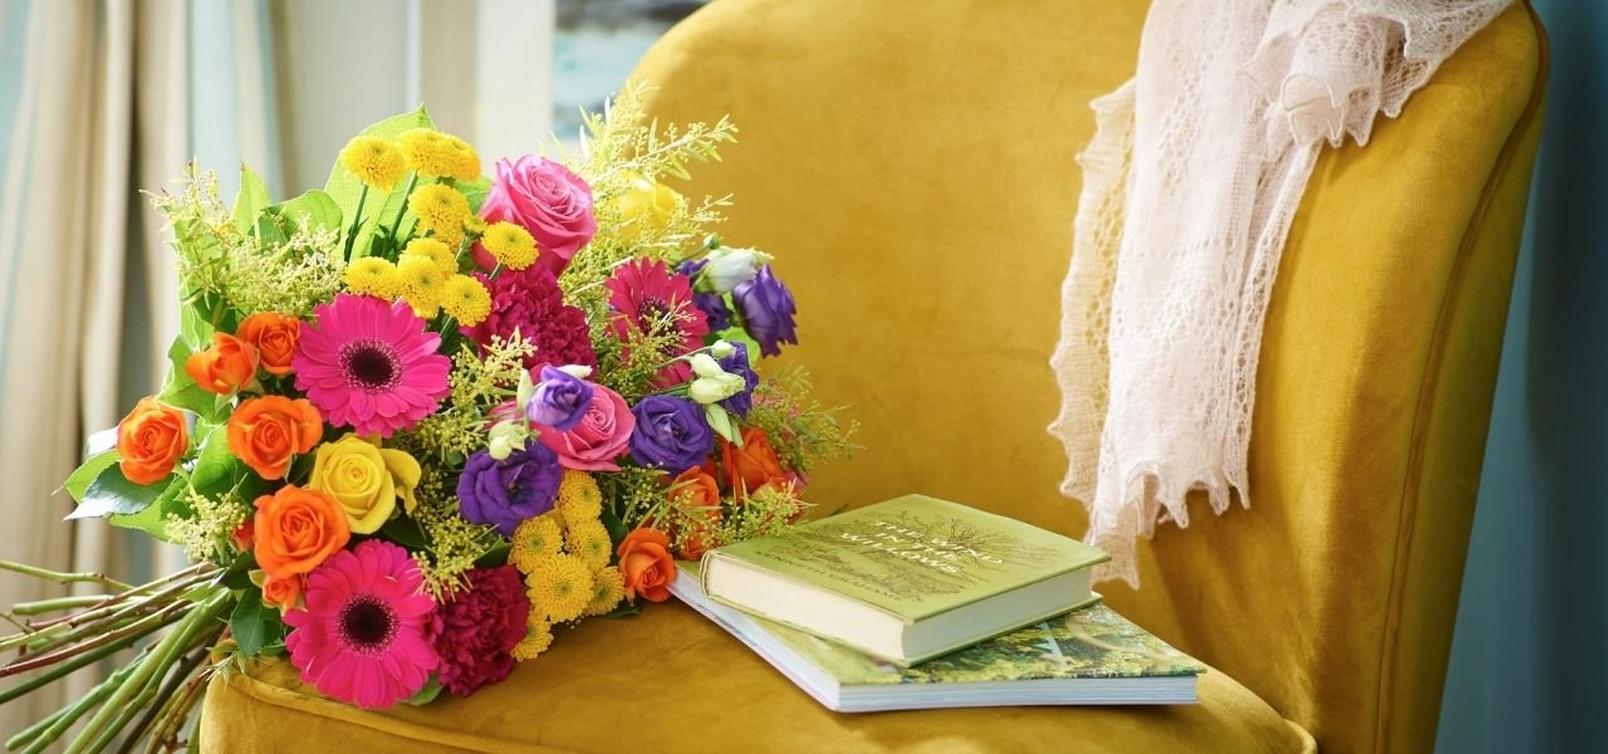 bright-bouquet-on-armchair-with-books